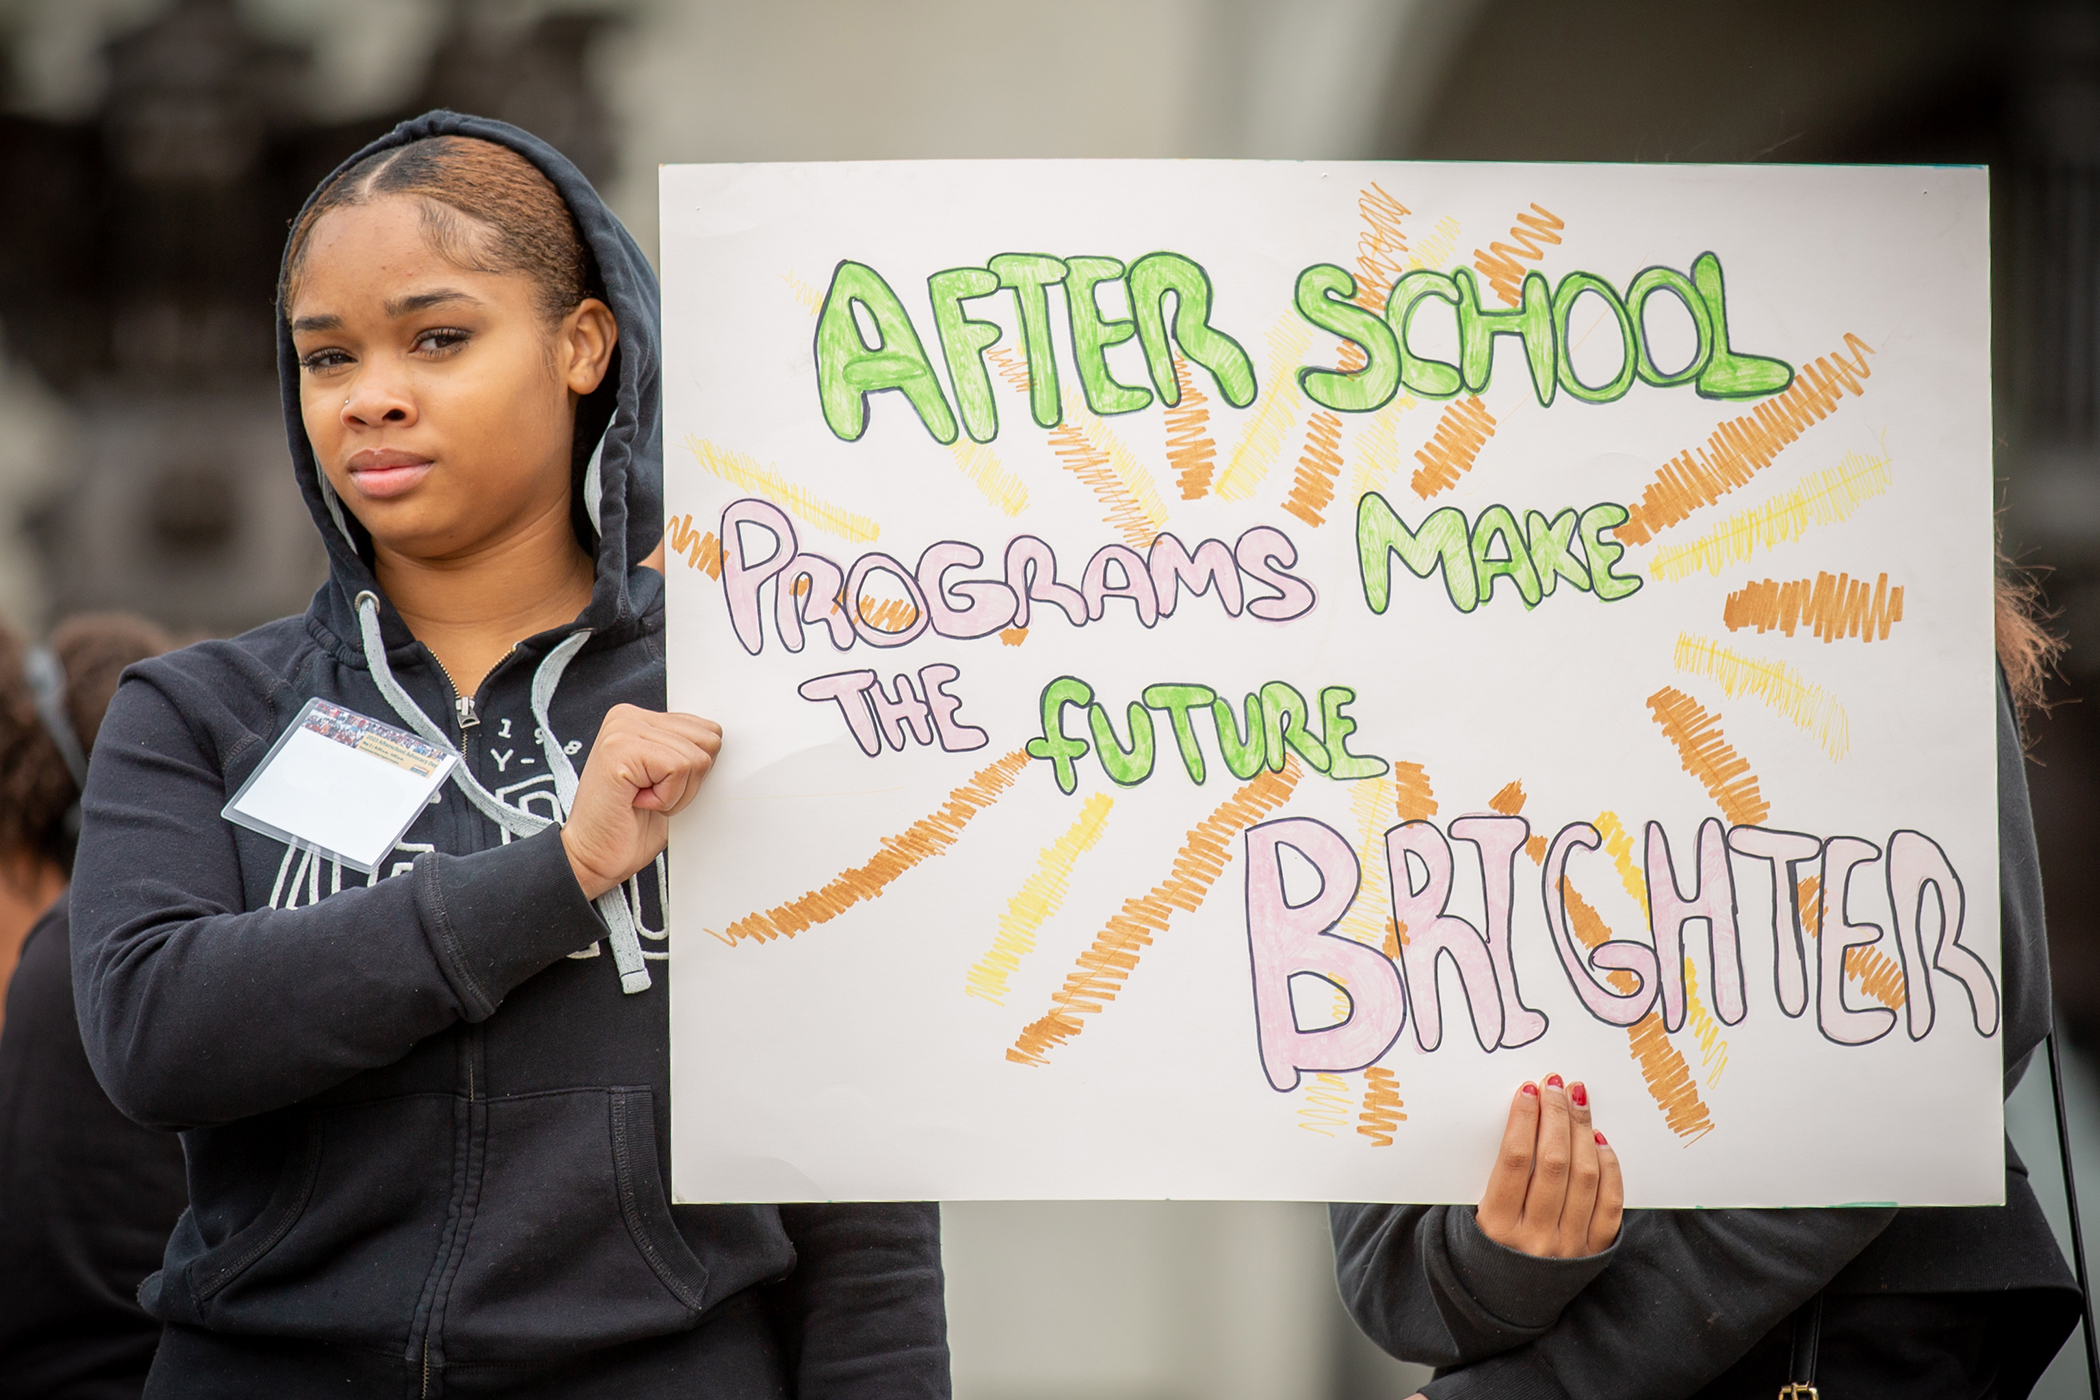 youth holding homemade poster stating "Afterschool programs make the future bright"